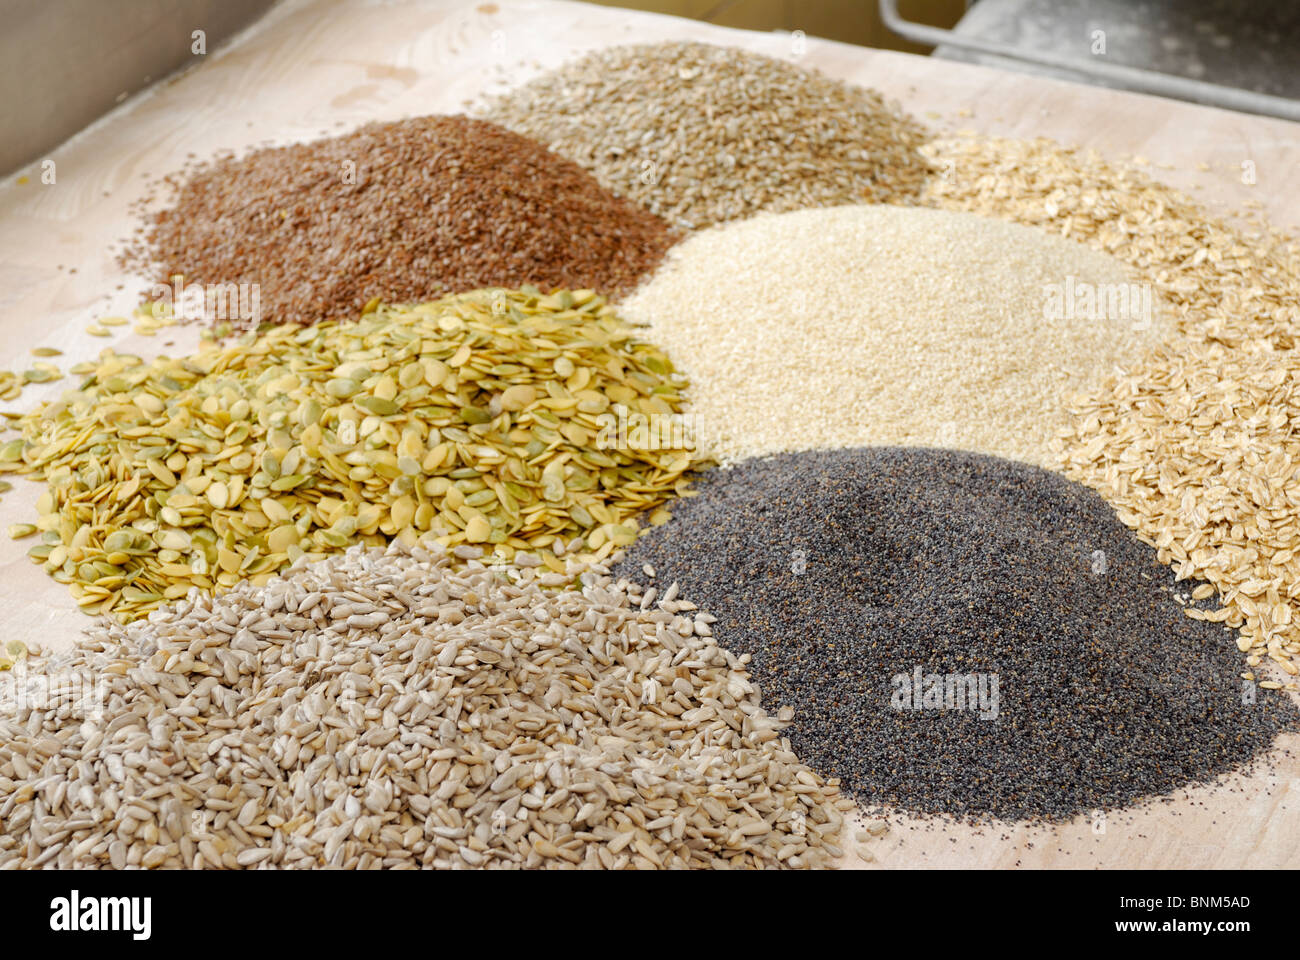 different types of grains as ingredients of baking bread Stock Photo